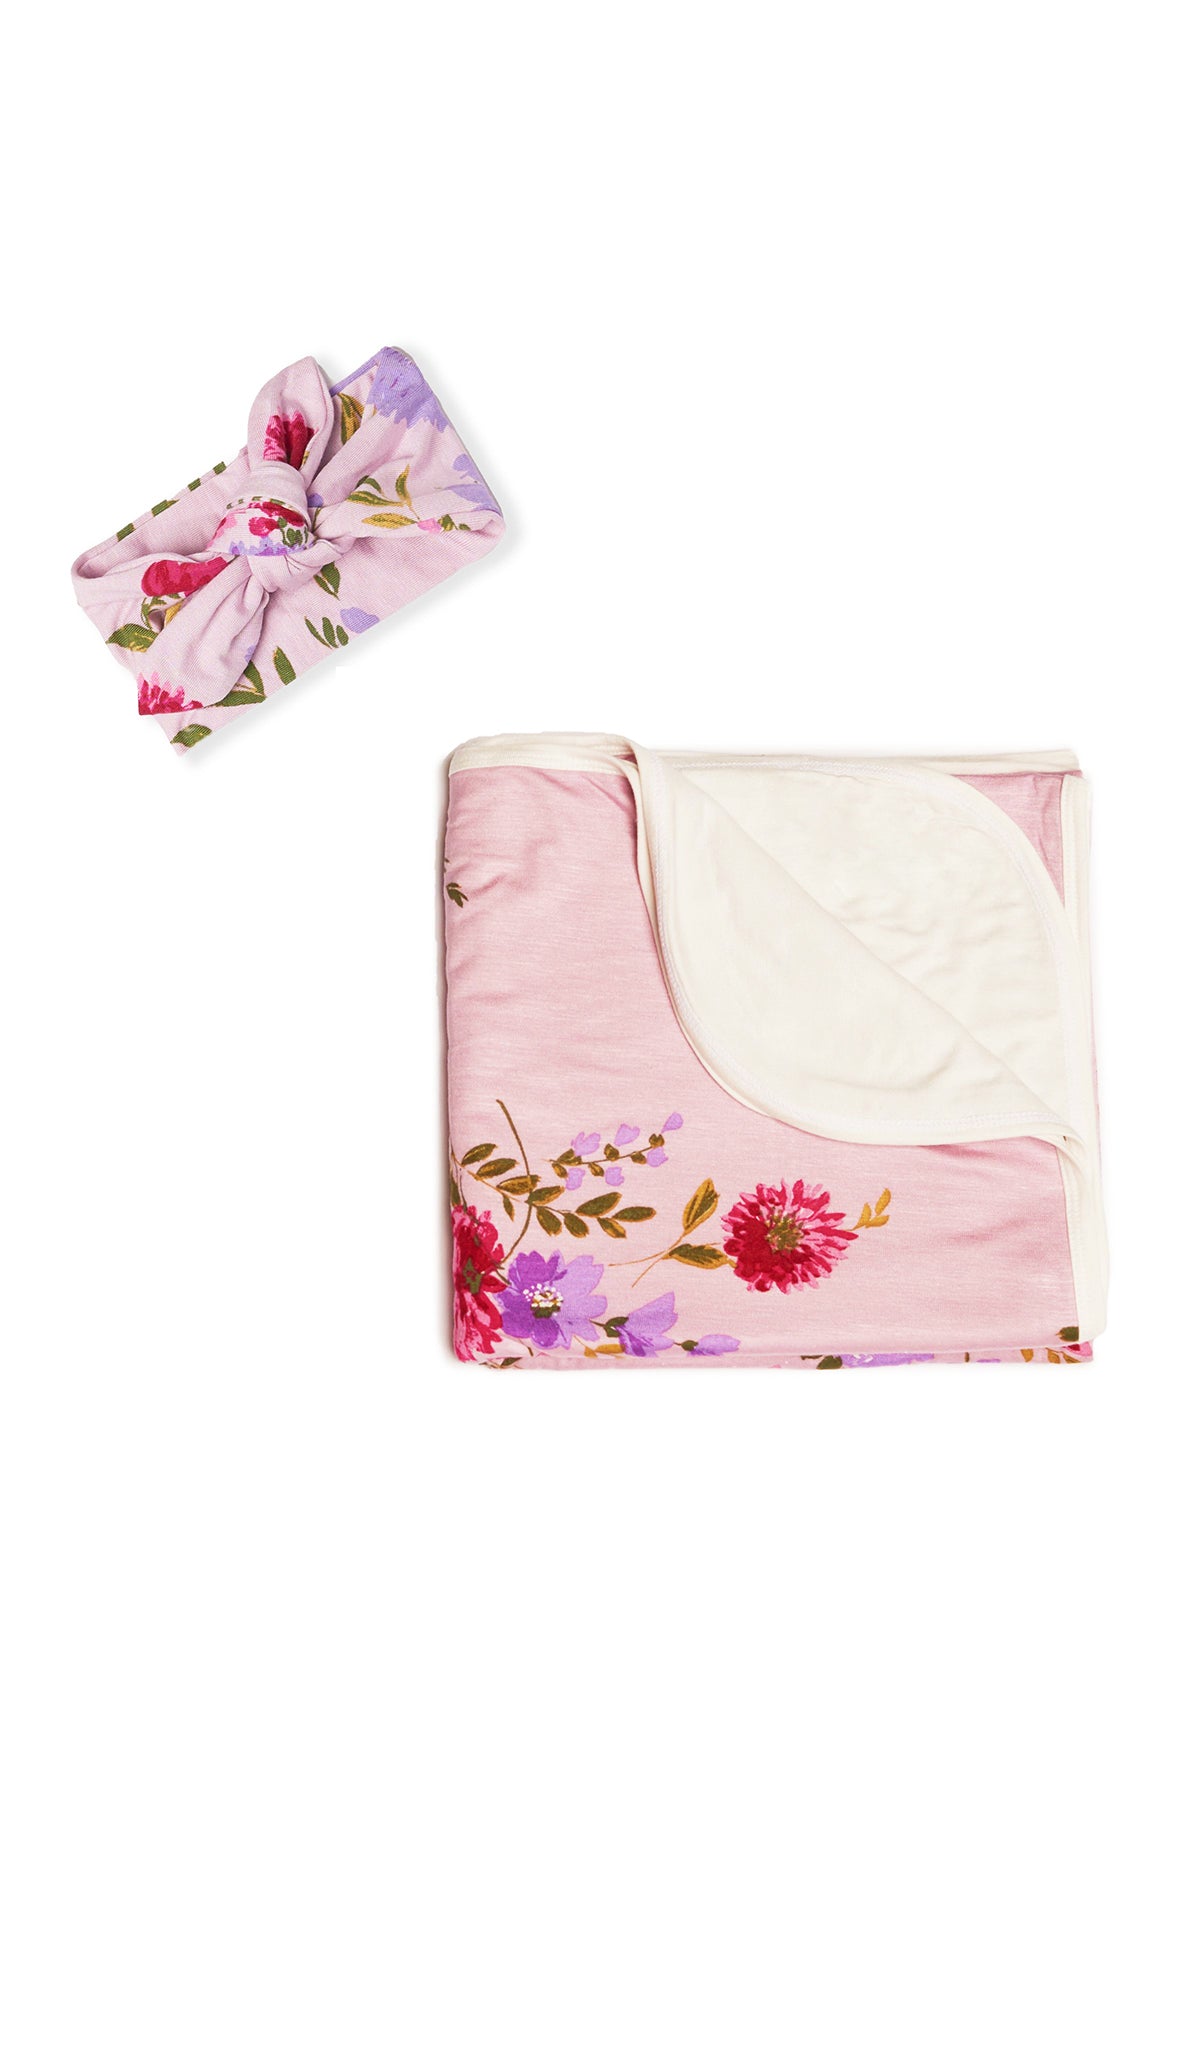 Swaddle & Headwrap Set - Dusty Rose. Flat shot of the floral blanket folded and laying next to headwrap in matching print.